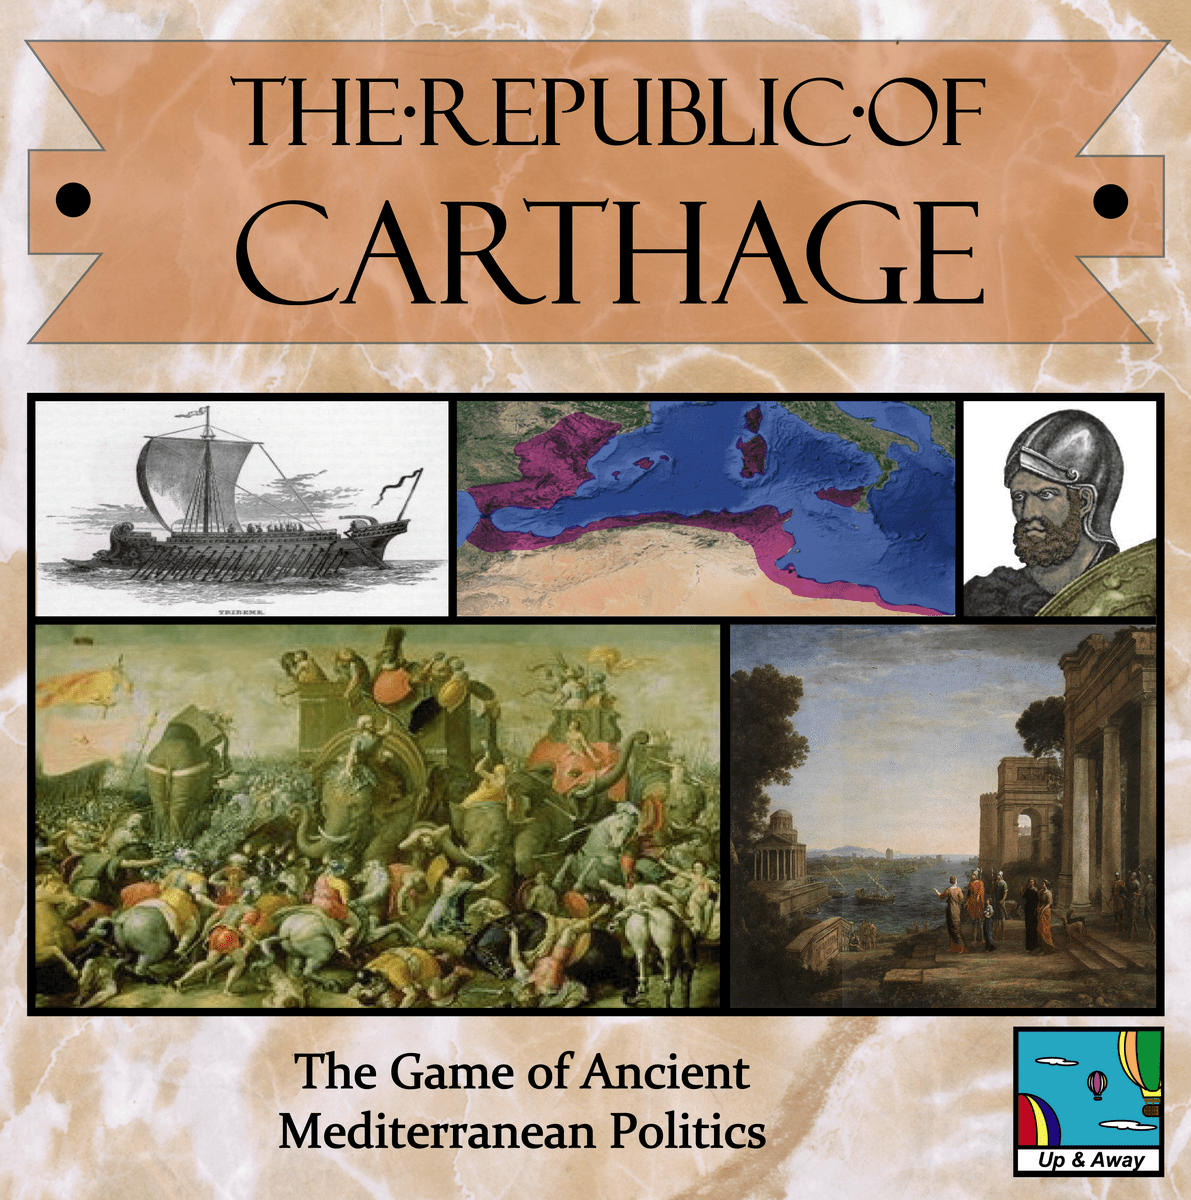 The Republic of Carthage